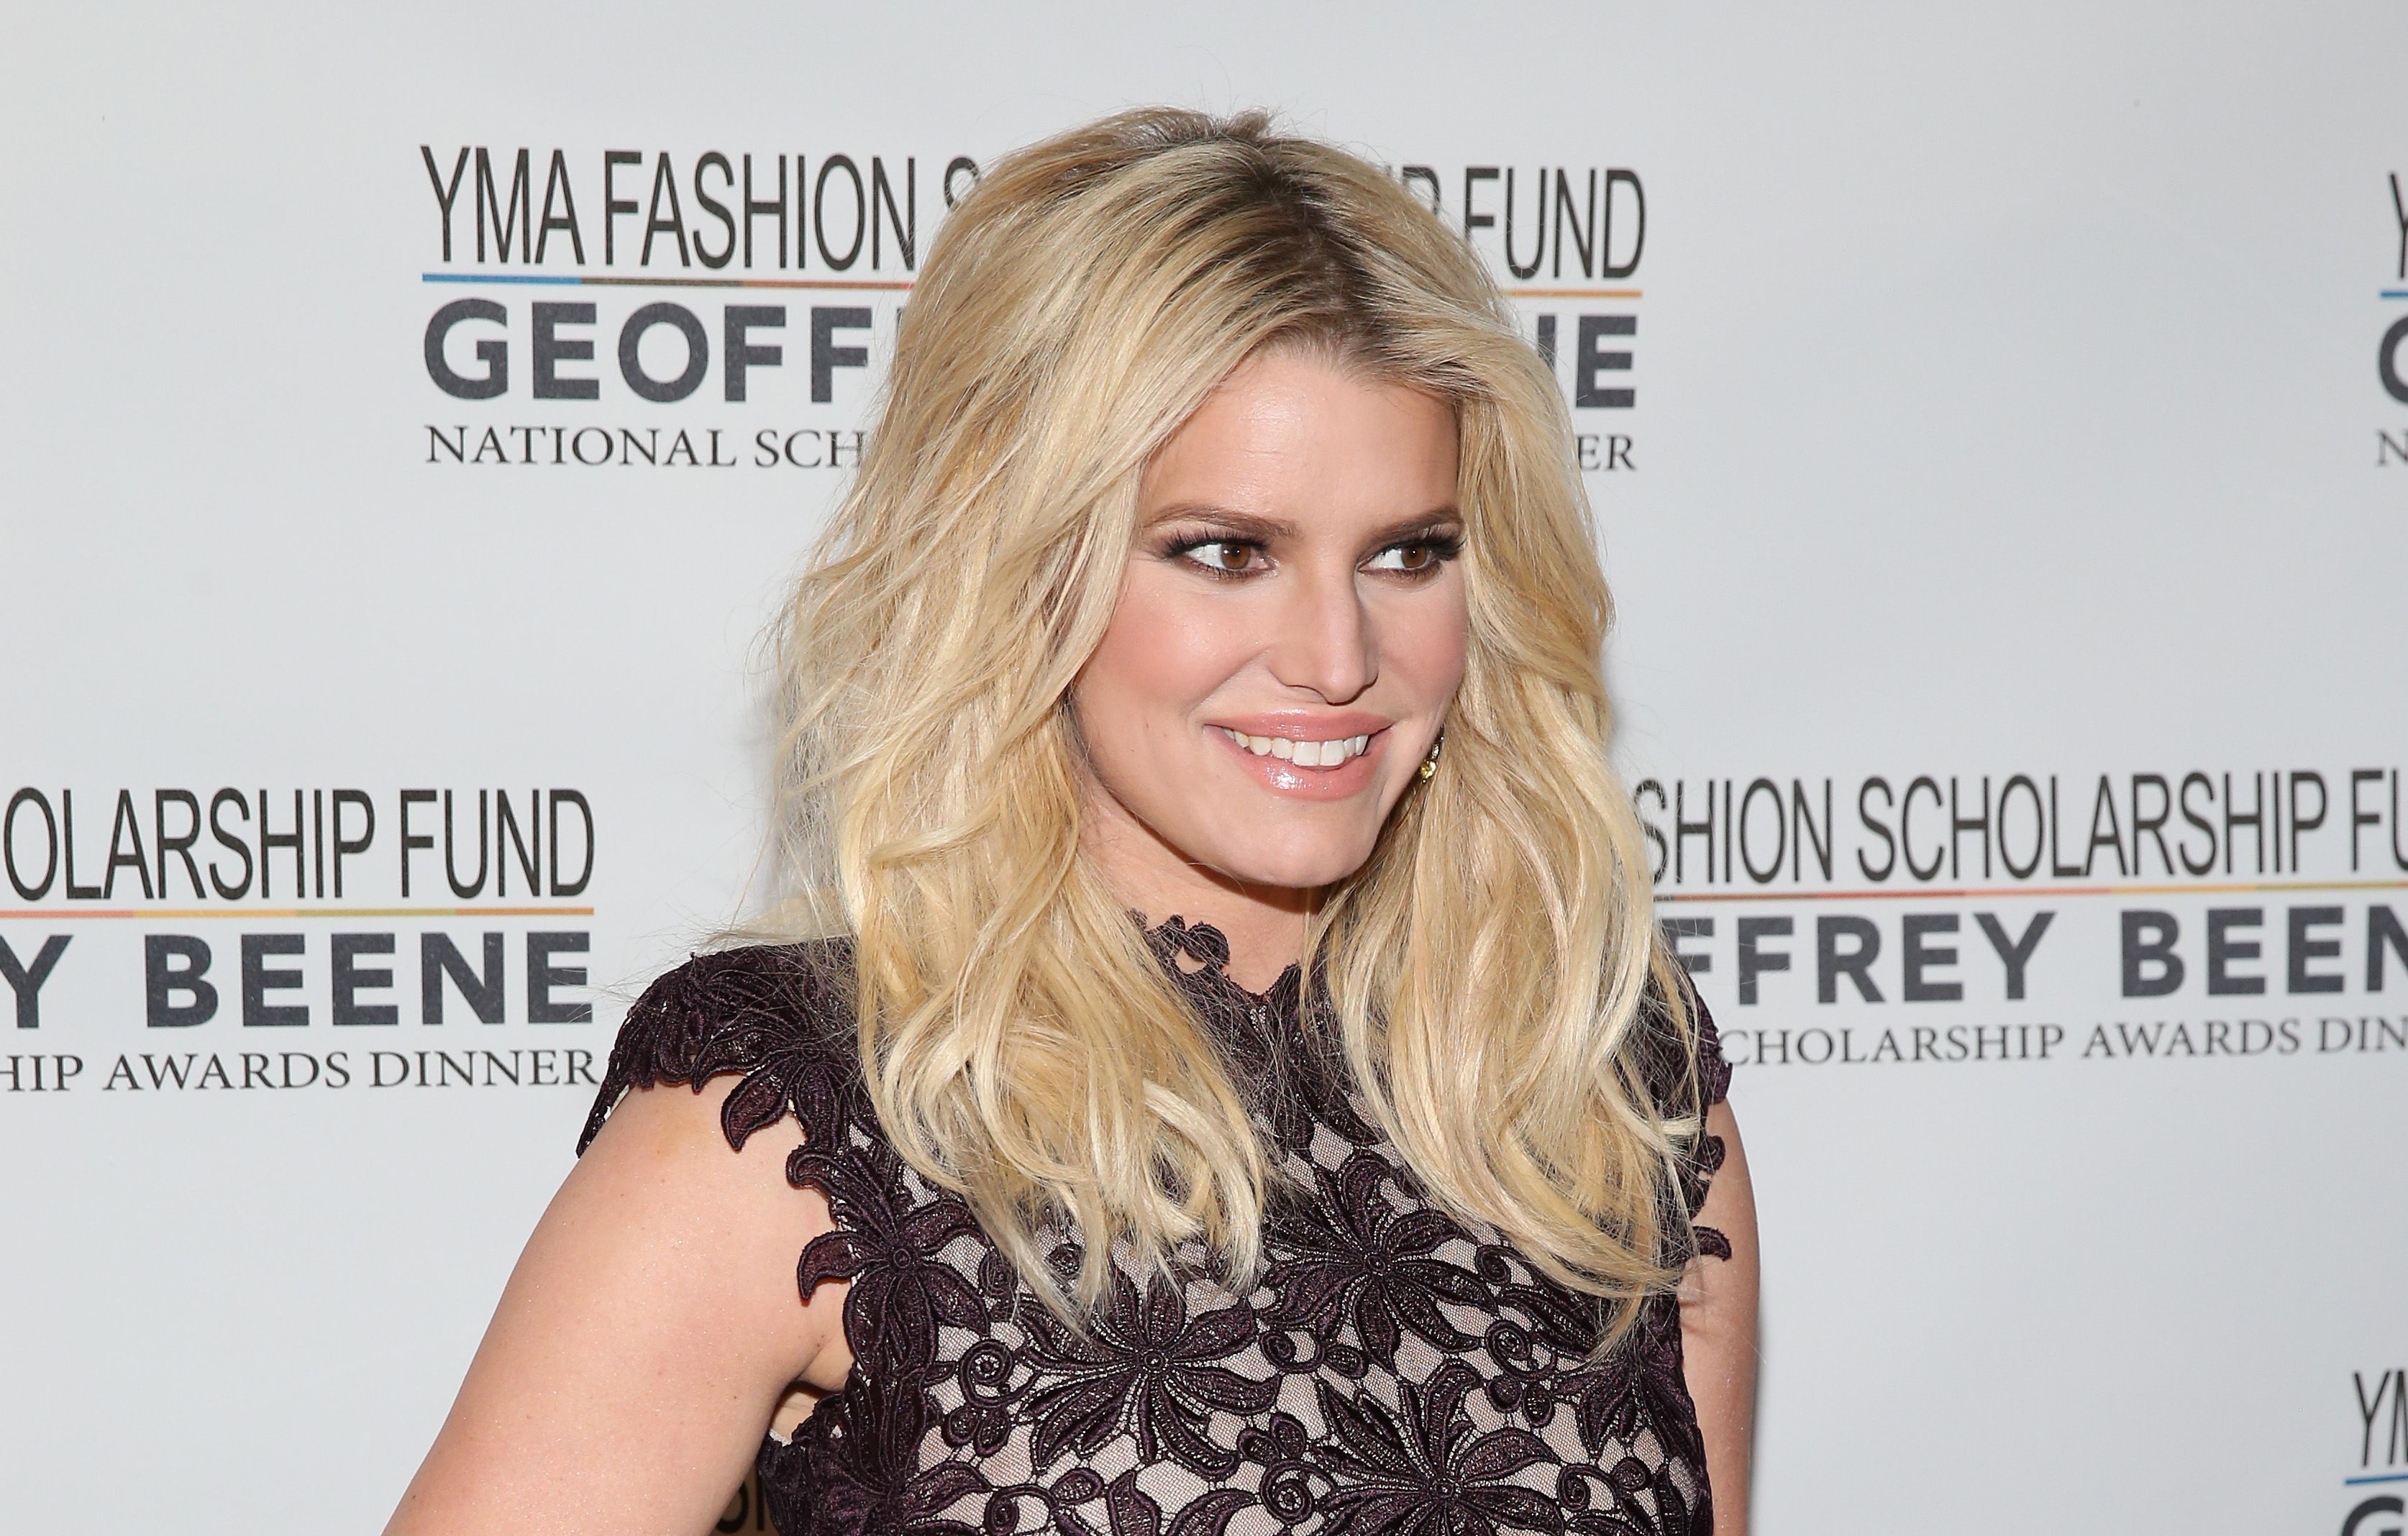 Jessica Simpson at YMA Fashion Scholarship Fund Geoffrey Beene National Scholarship Awards Gala on January 12, 2016 in New York City | Photo: Getty Images